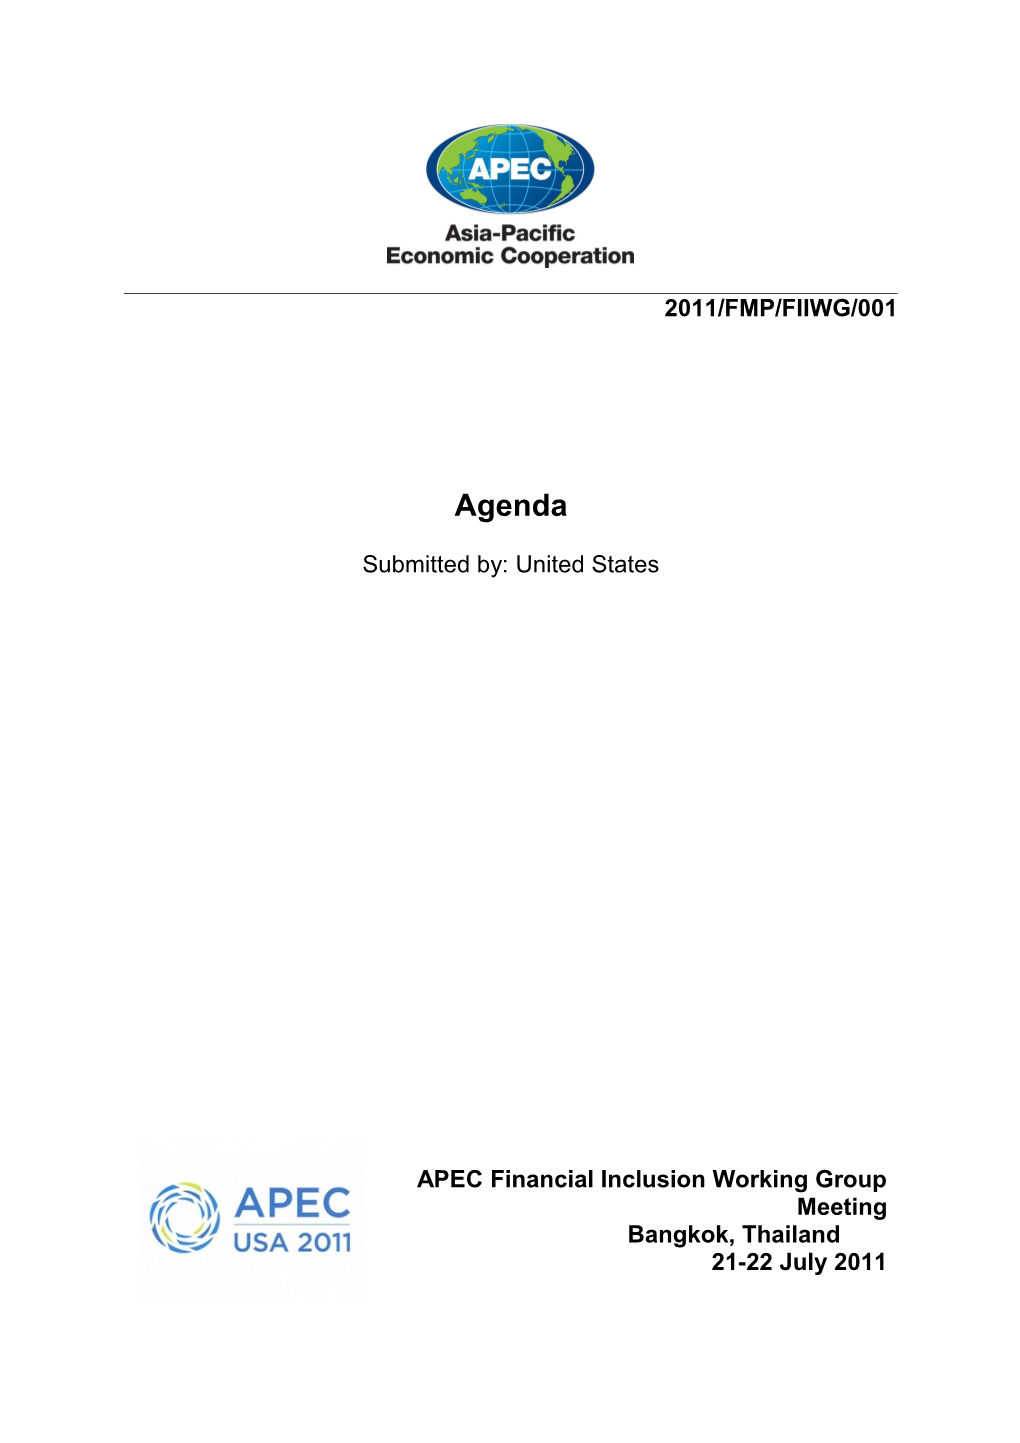 APEC Financial Inclusion Working Group Meeting